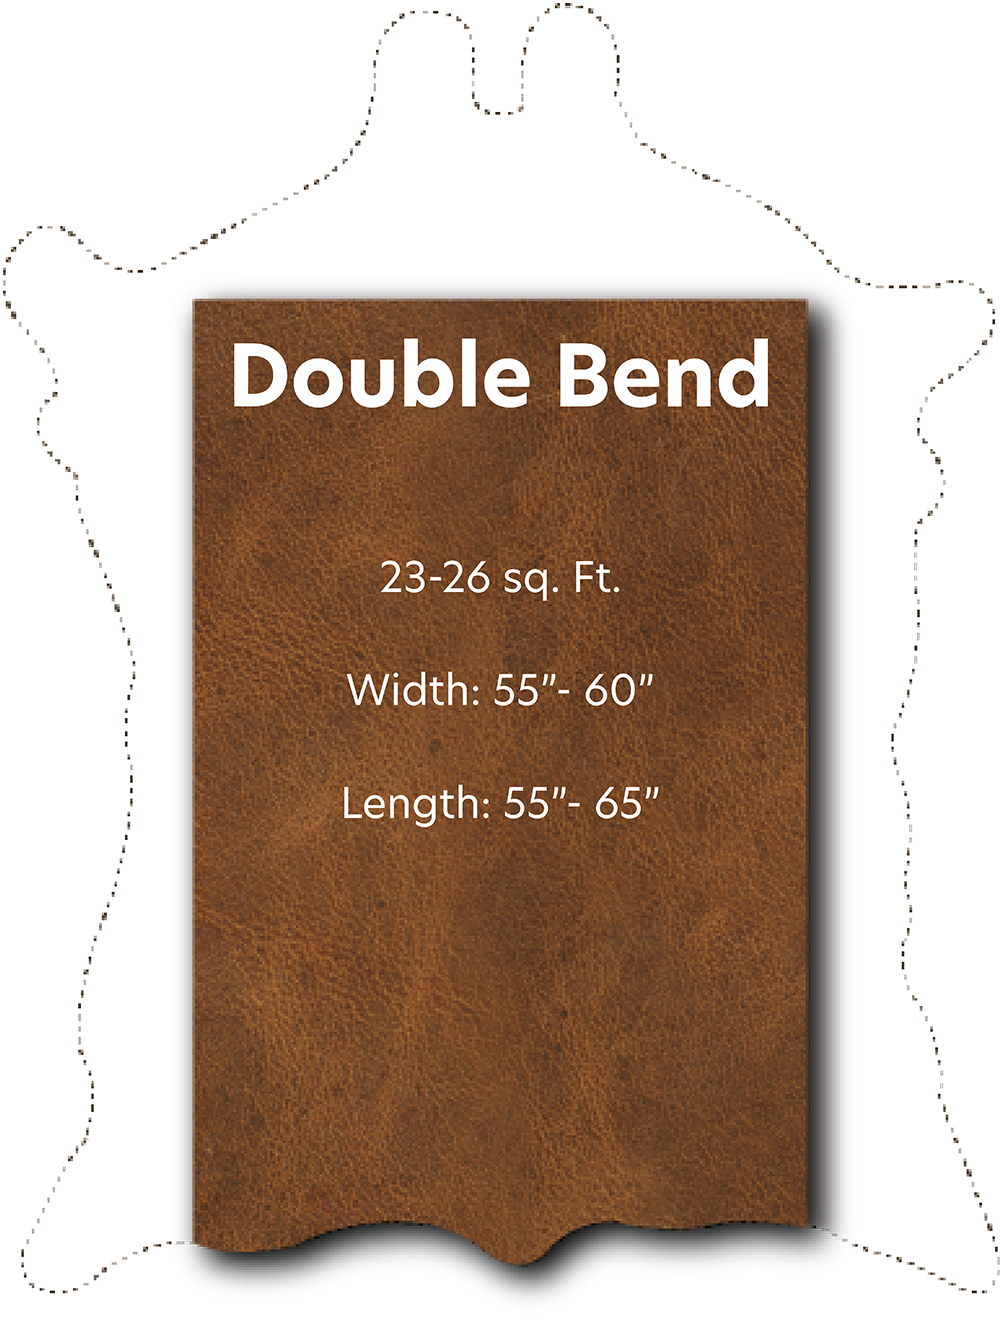 Double Bend with Dimensions